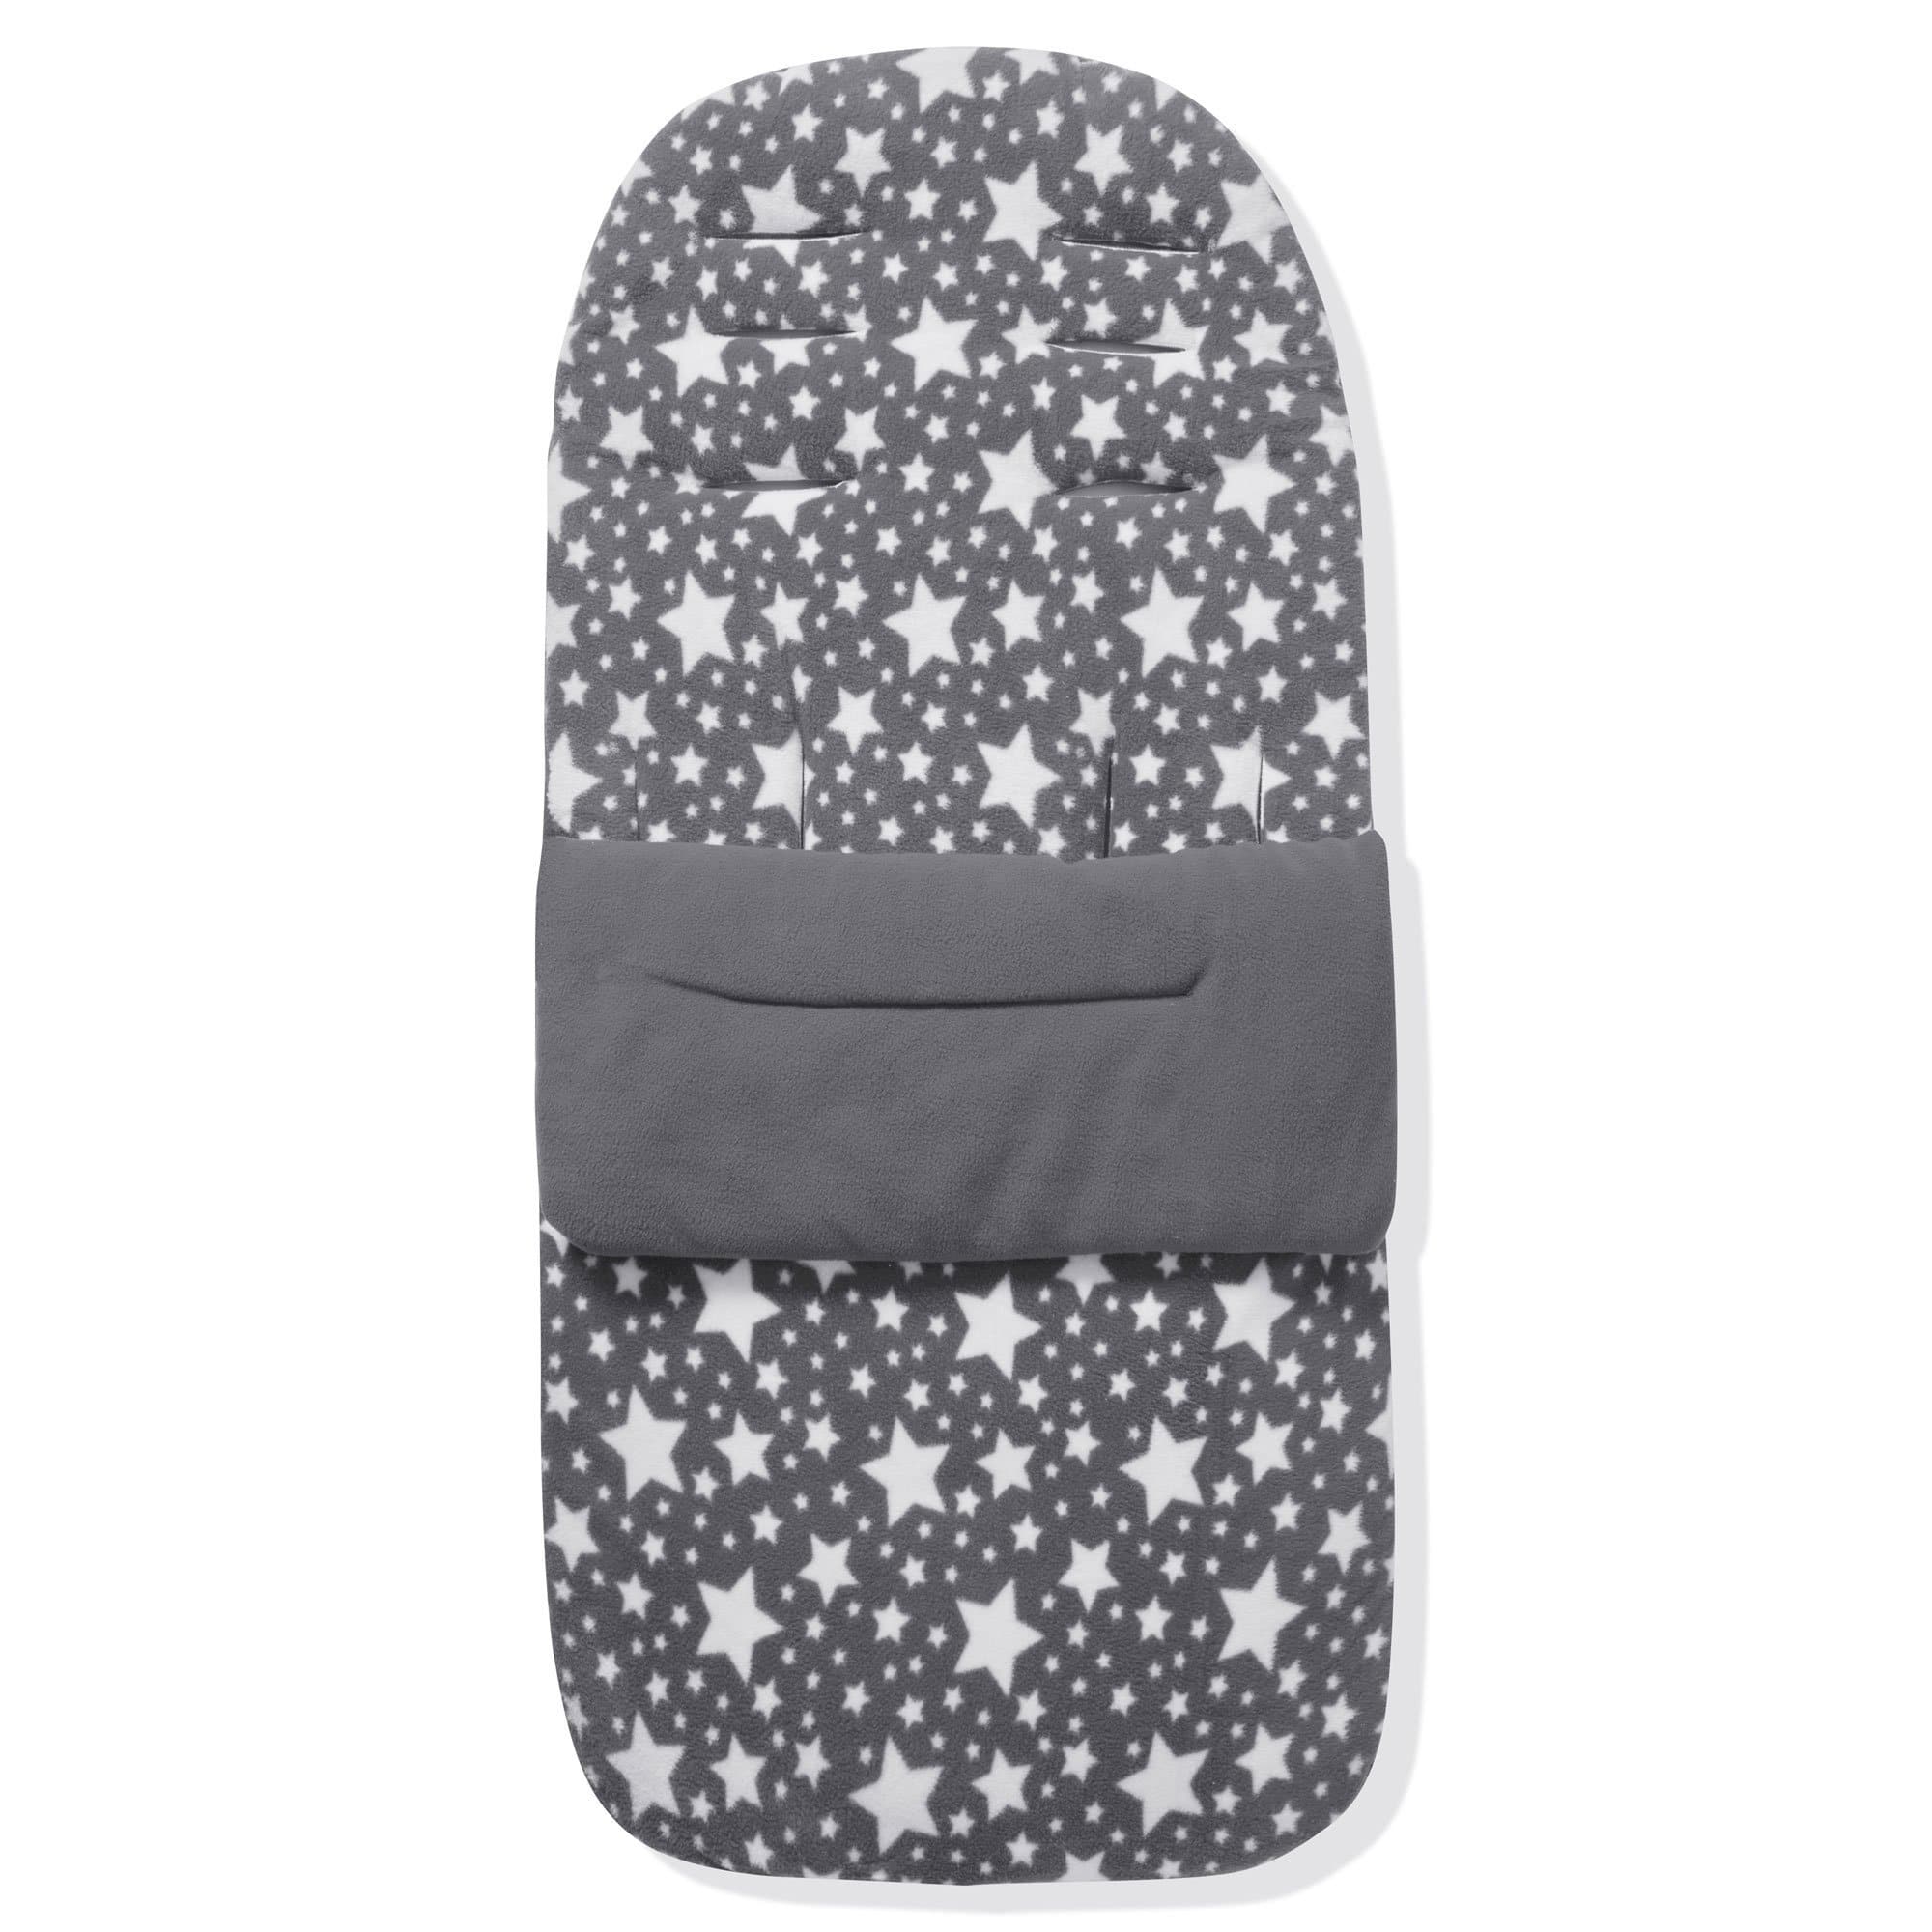 Fleece Footmuff / Cosy Toes Compatible with Gesslein - Grey Star / Fits All Models | For Your Little One